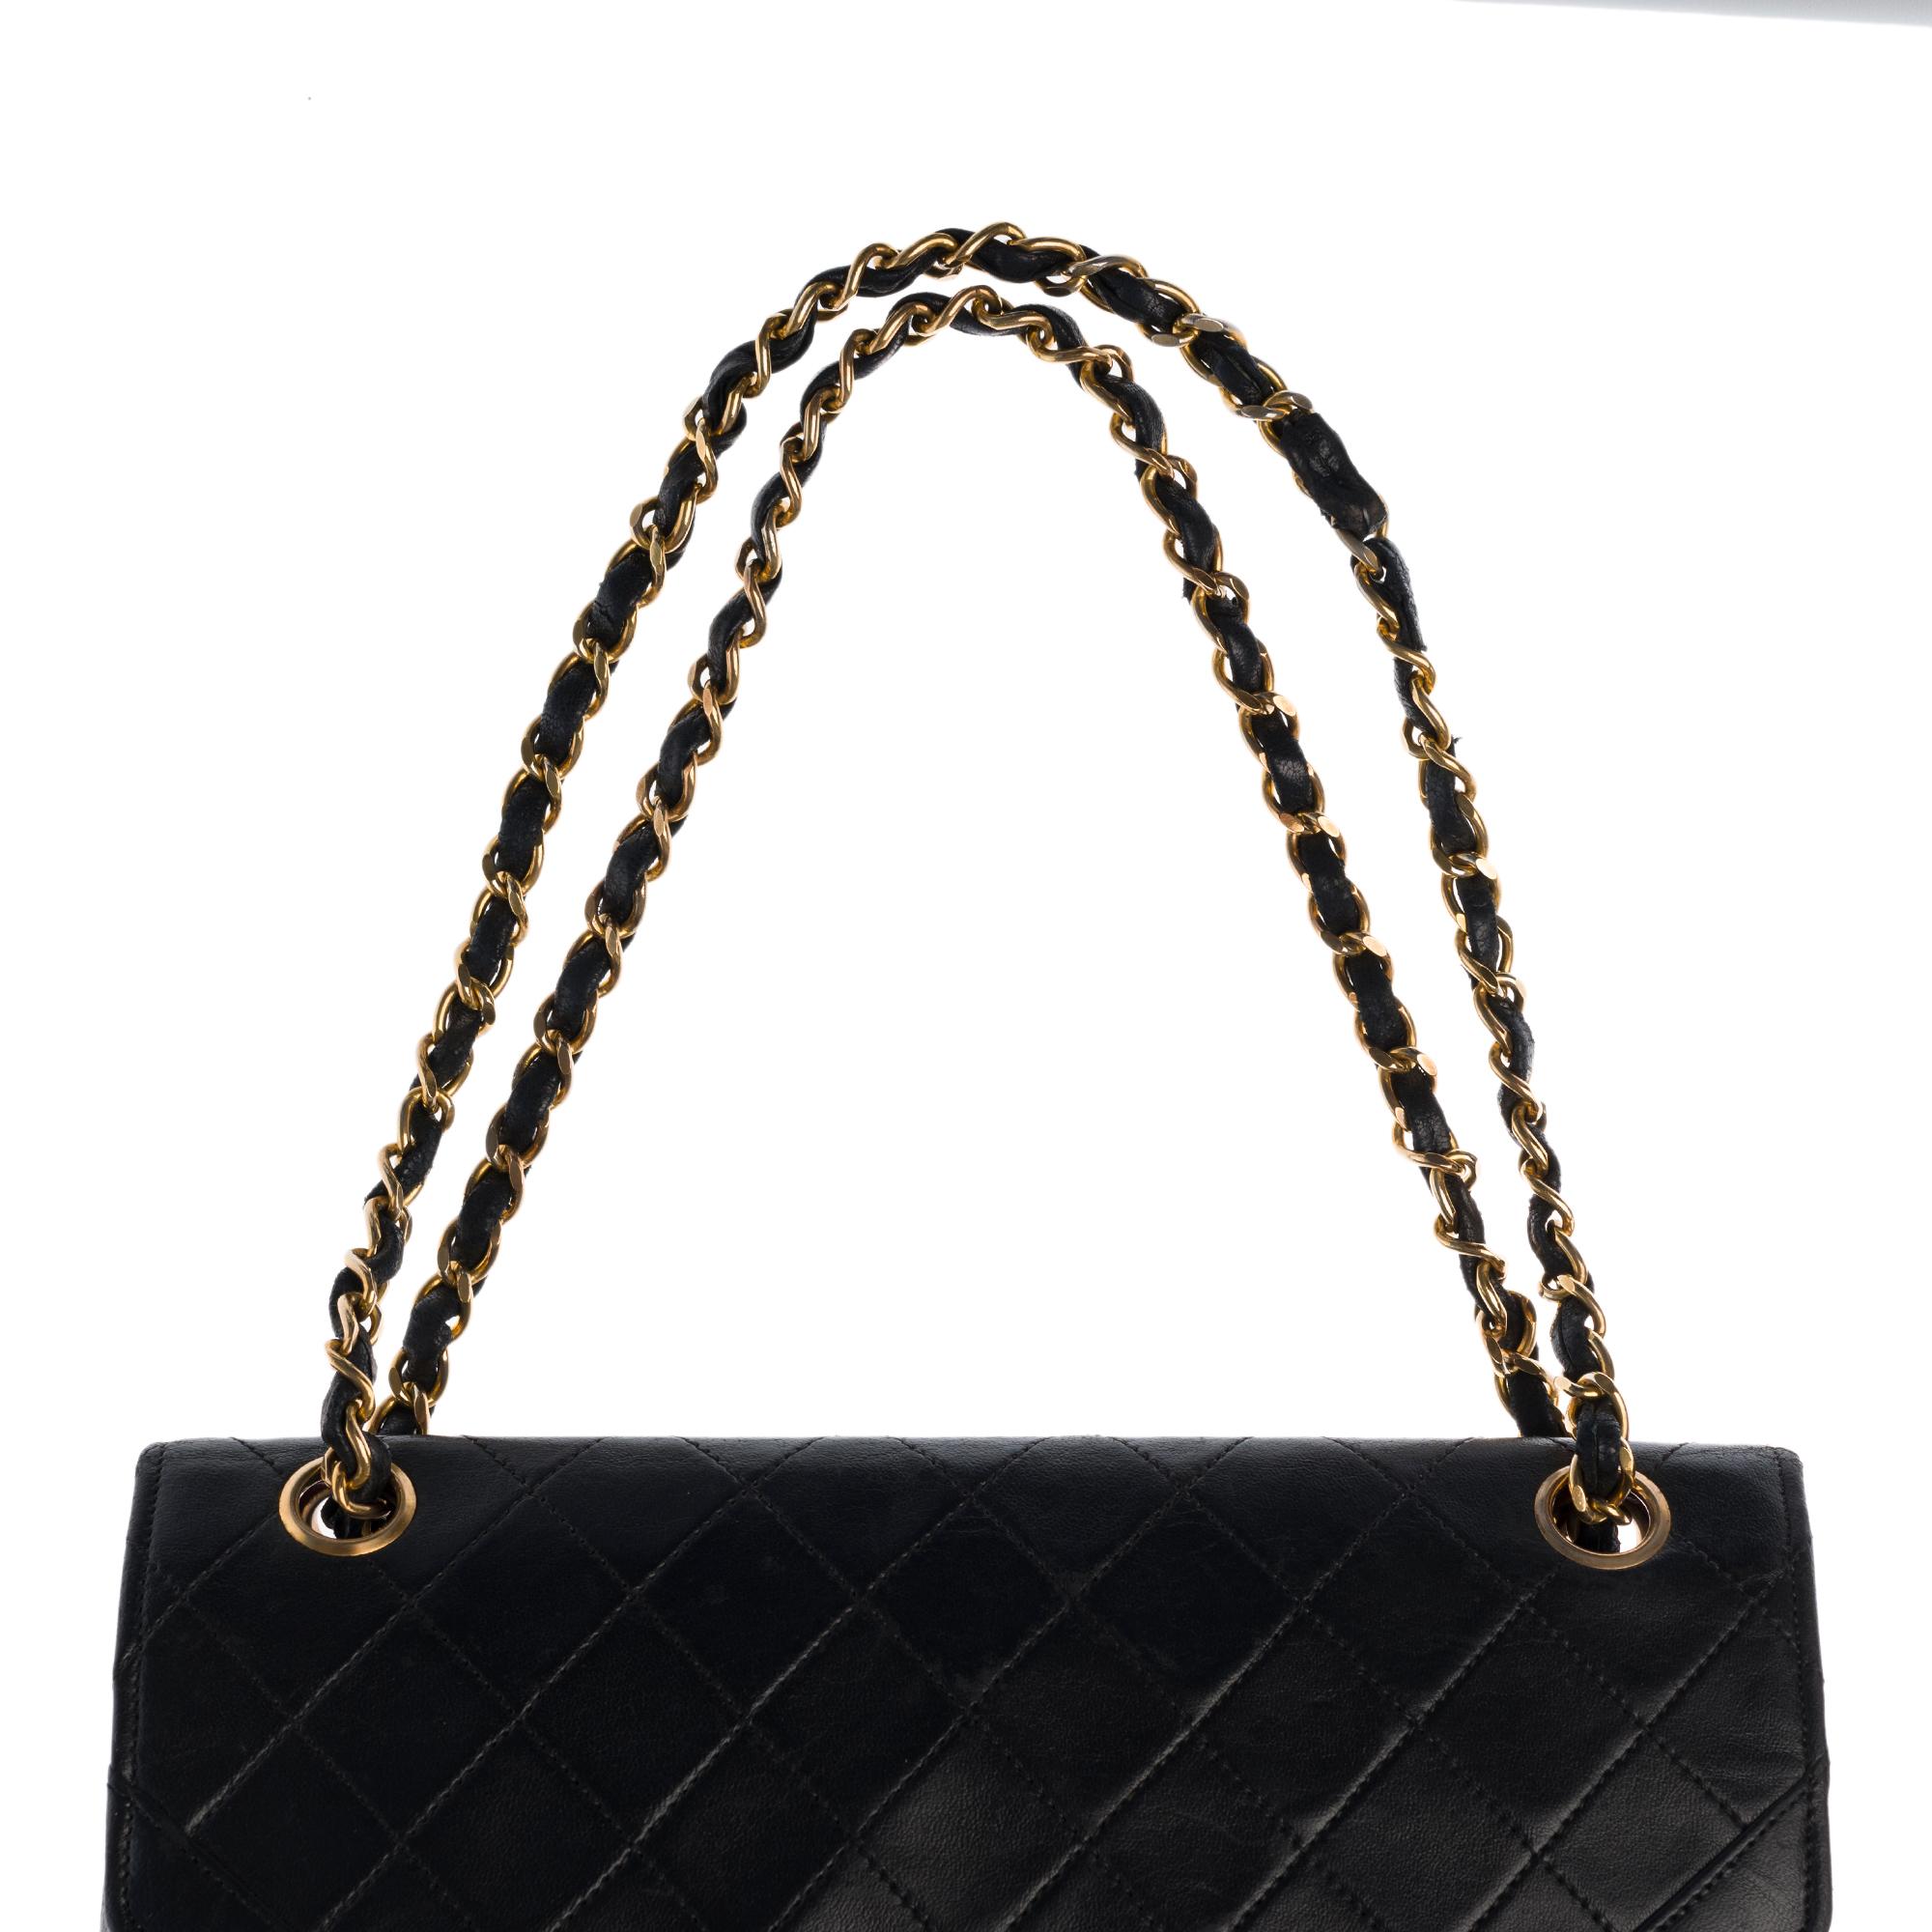 Chanel Classic Shoulder bag in black quilted leather and gold hardware 2